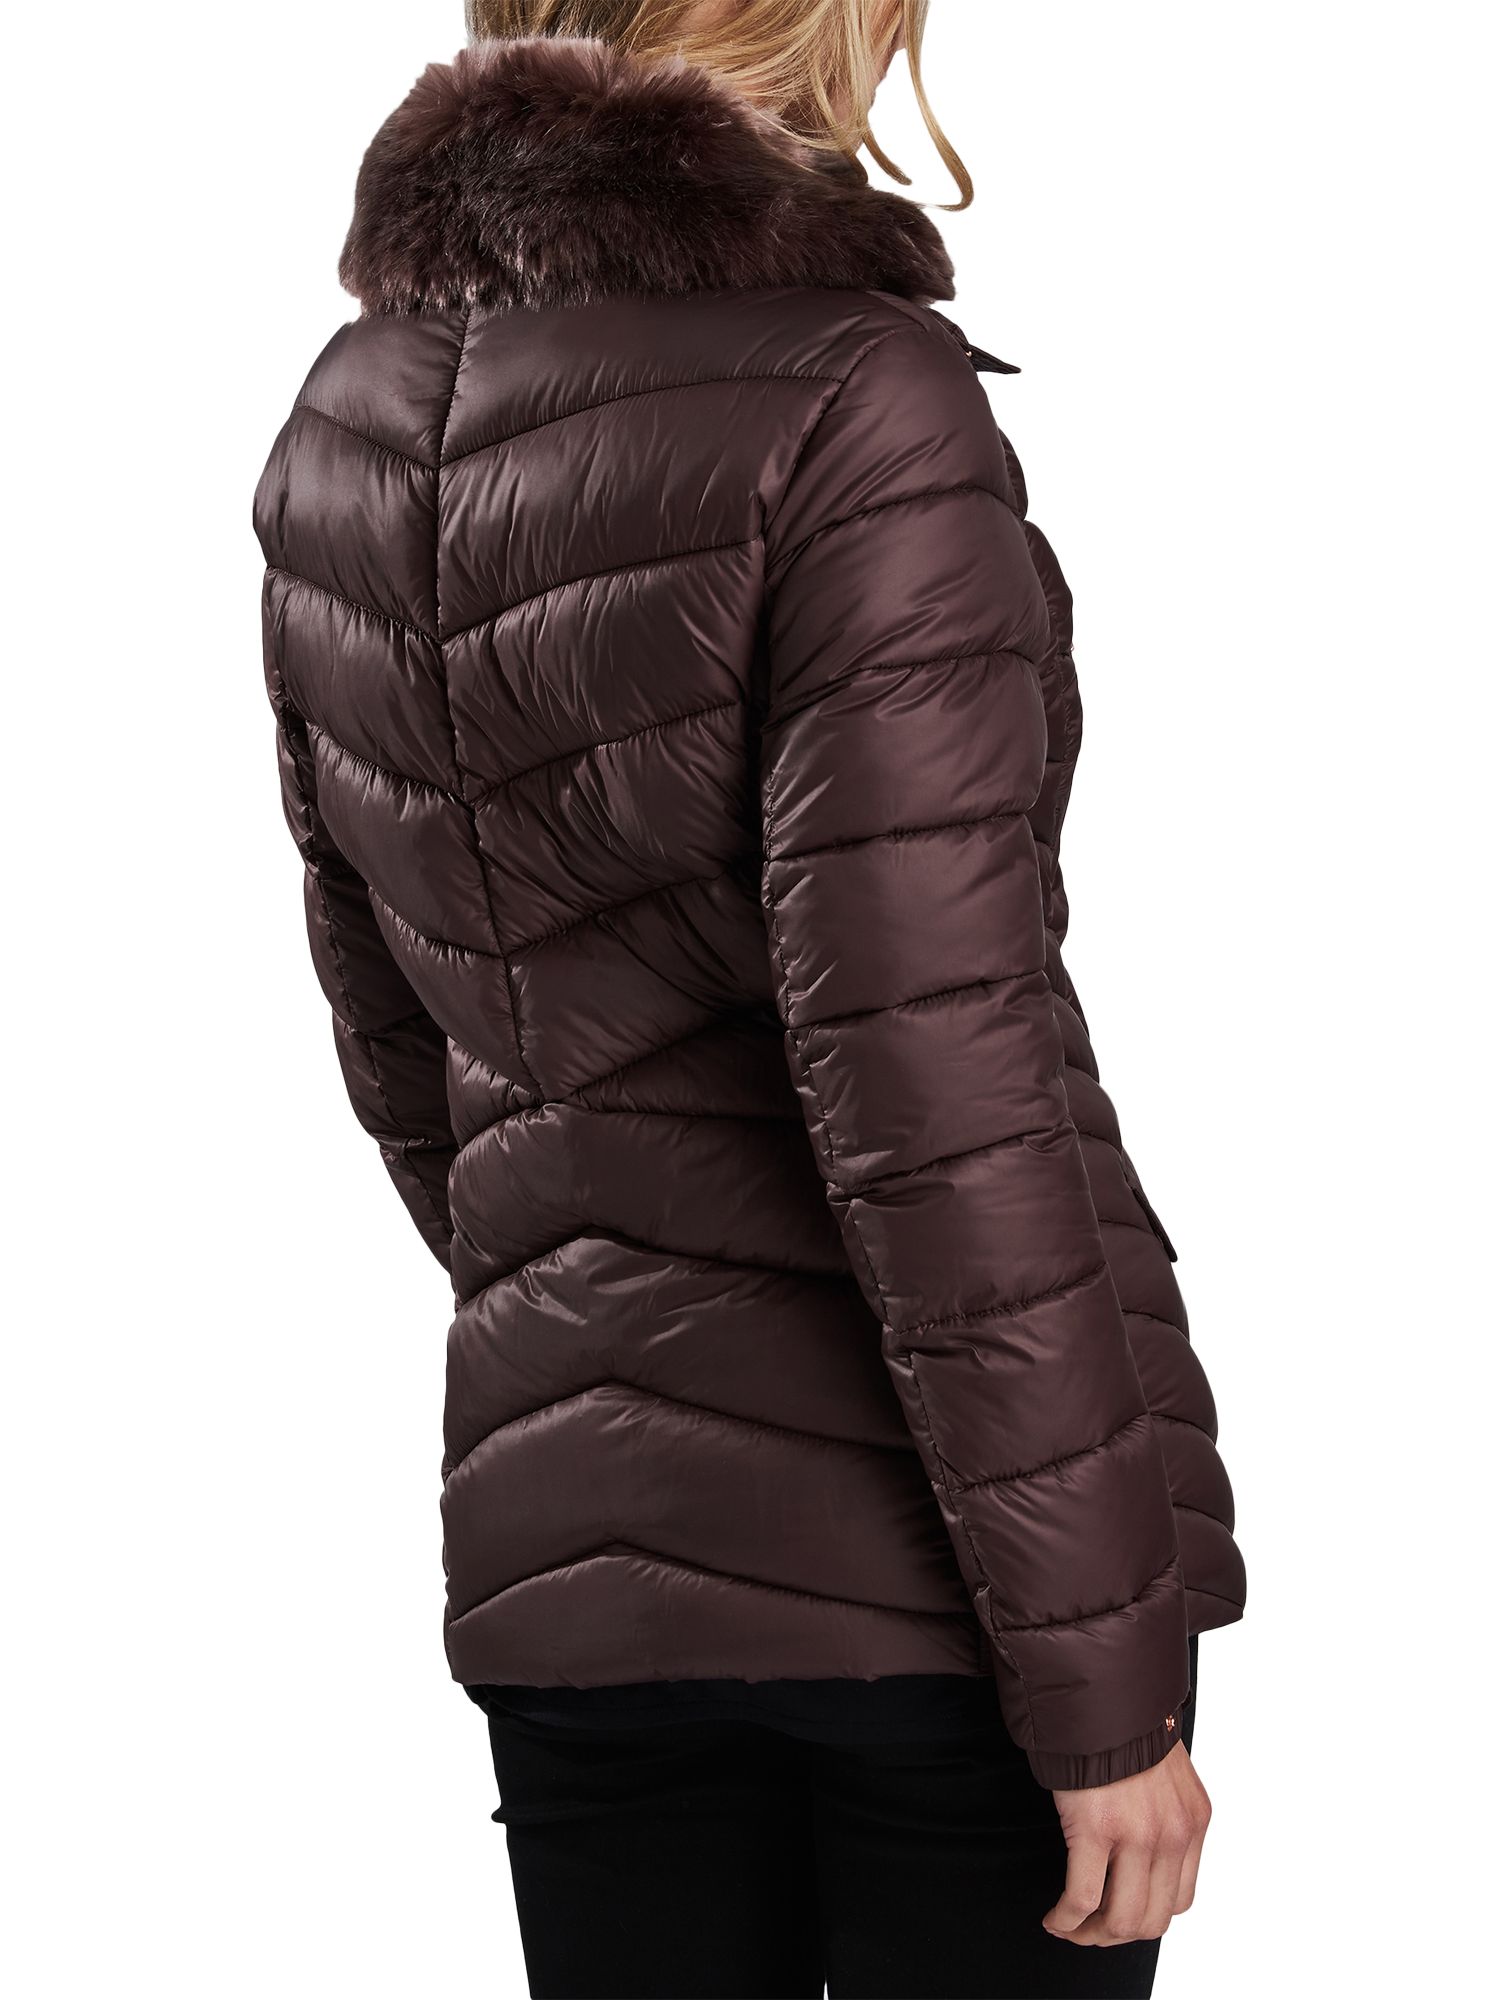 barbour international autocross quilted jacket